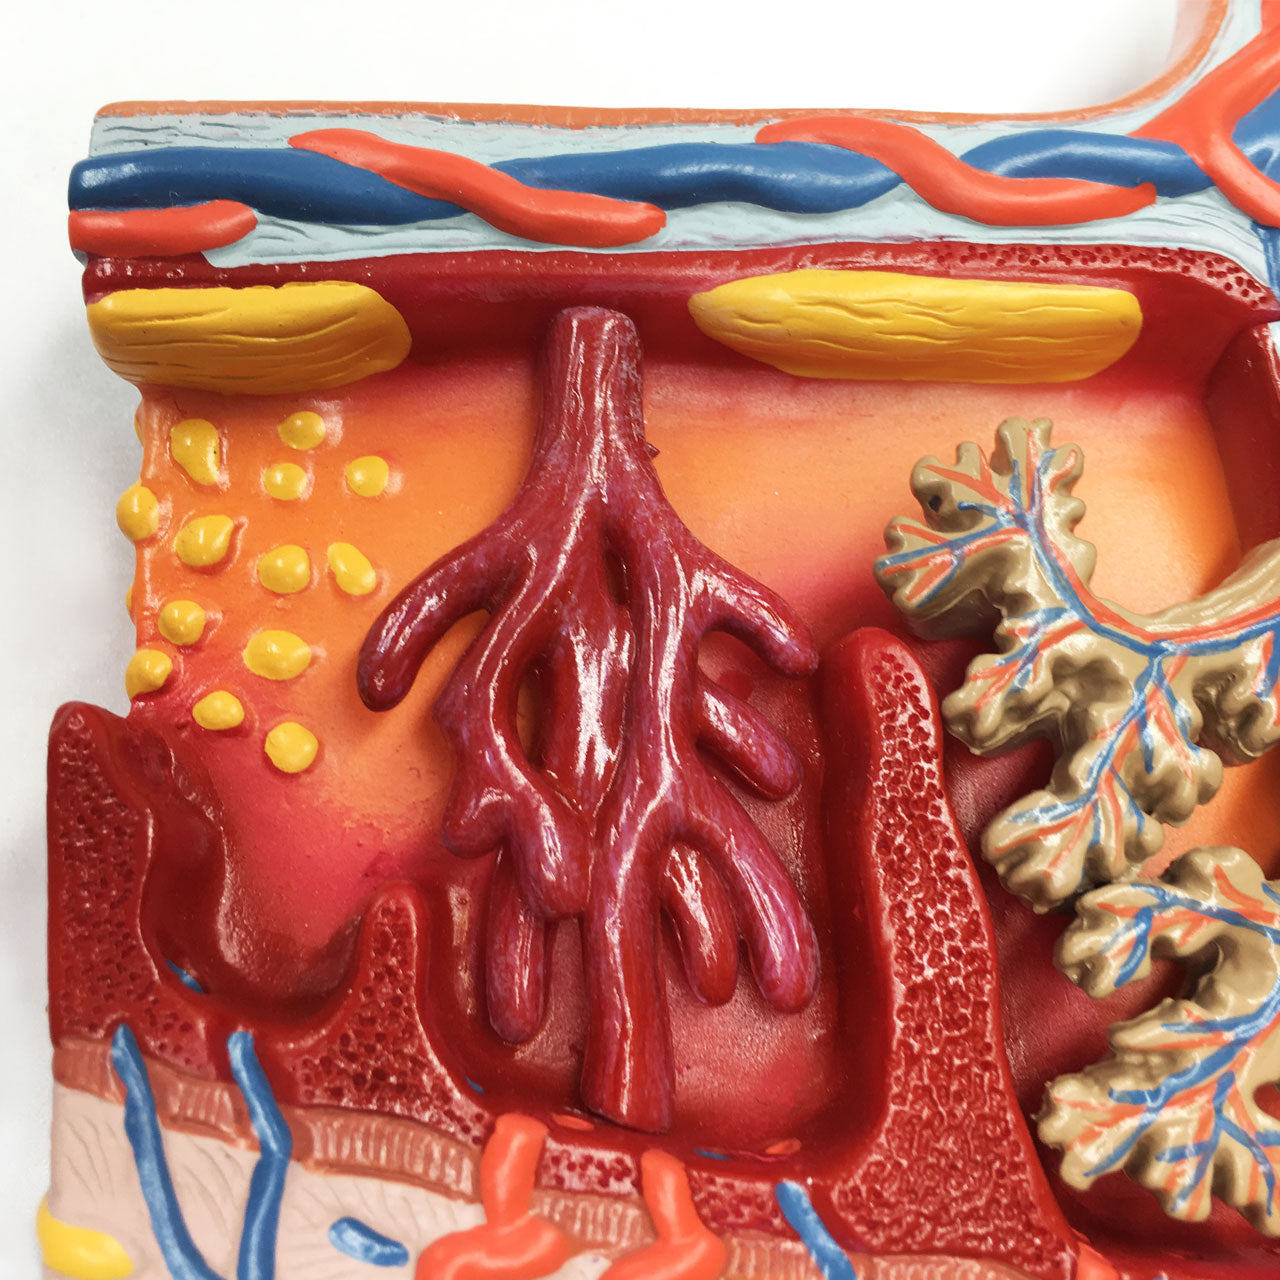 Evotech Scientific Enlarged Model of Placenta Detailed Cross Section Shows Blood Flow and Nutrition